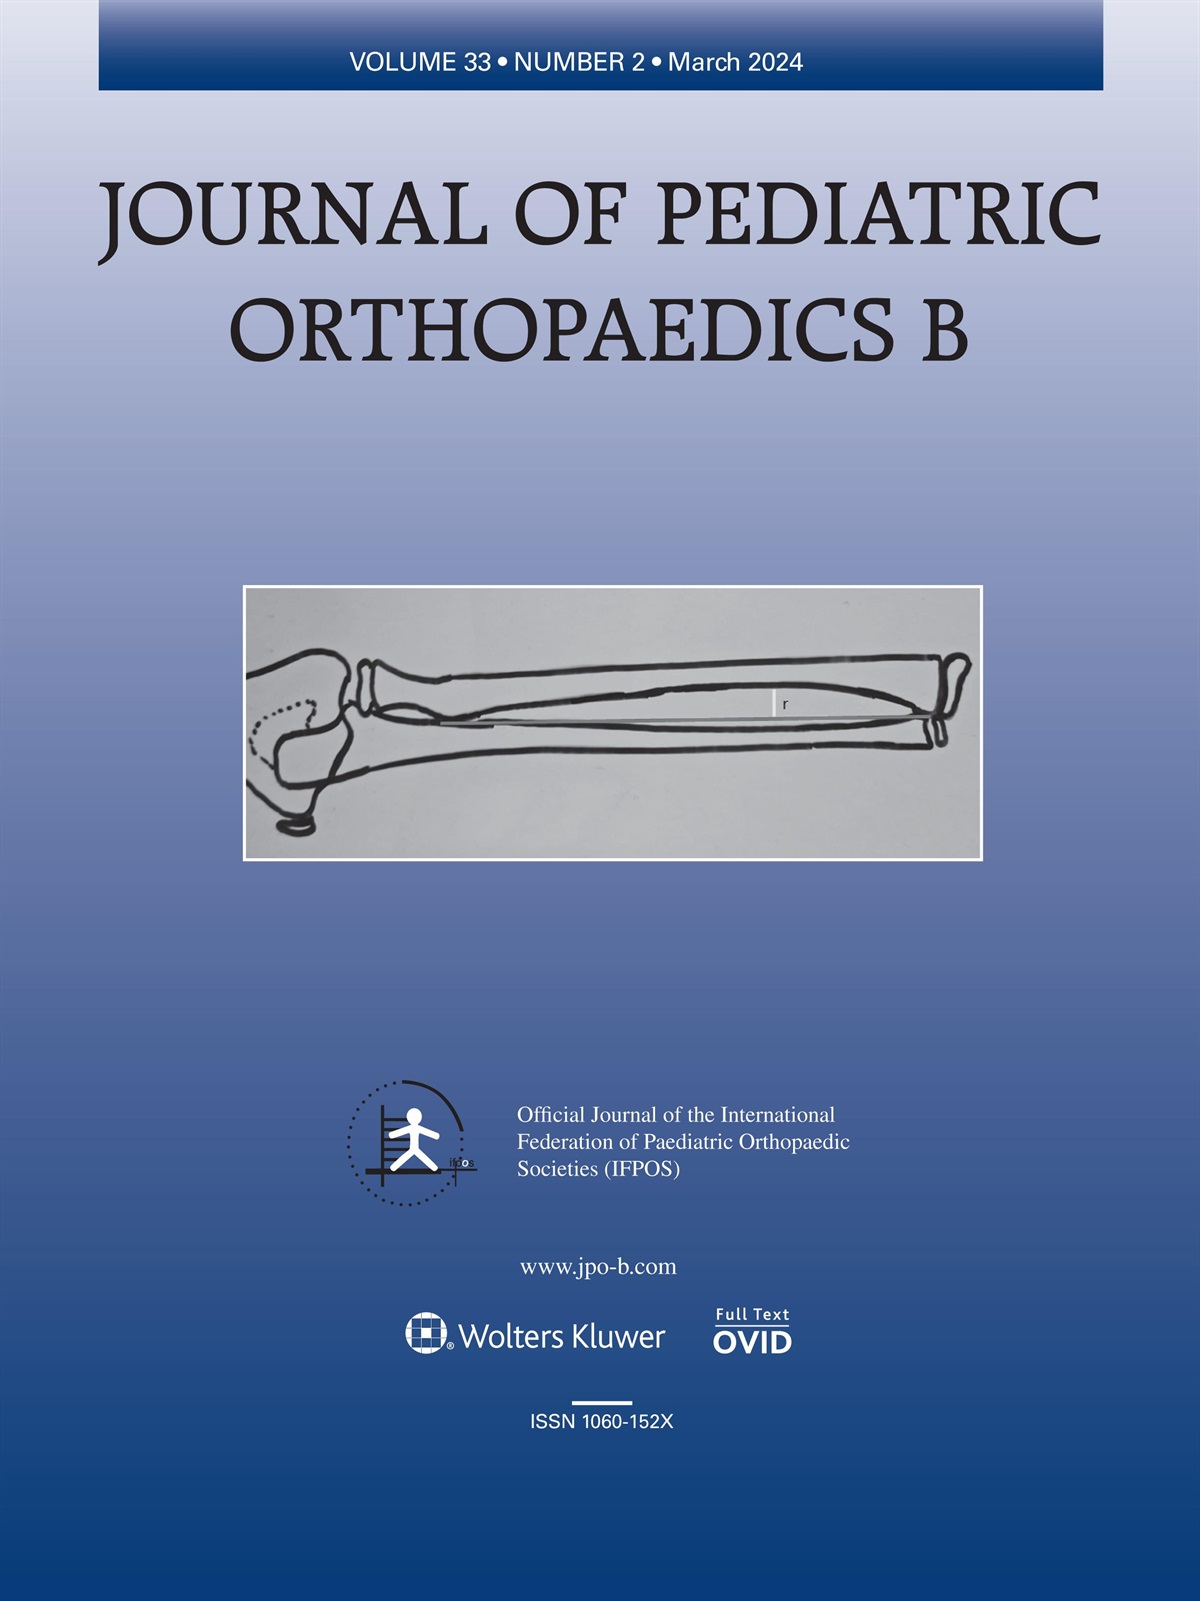 Use of lateral-exit crossed-pin fixation for pediatric supracondylar humeral fractures: a retrospective case series